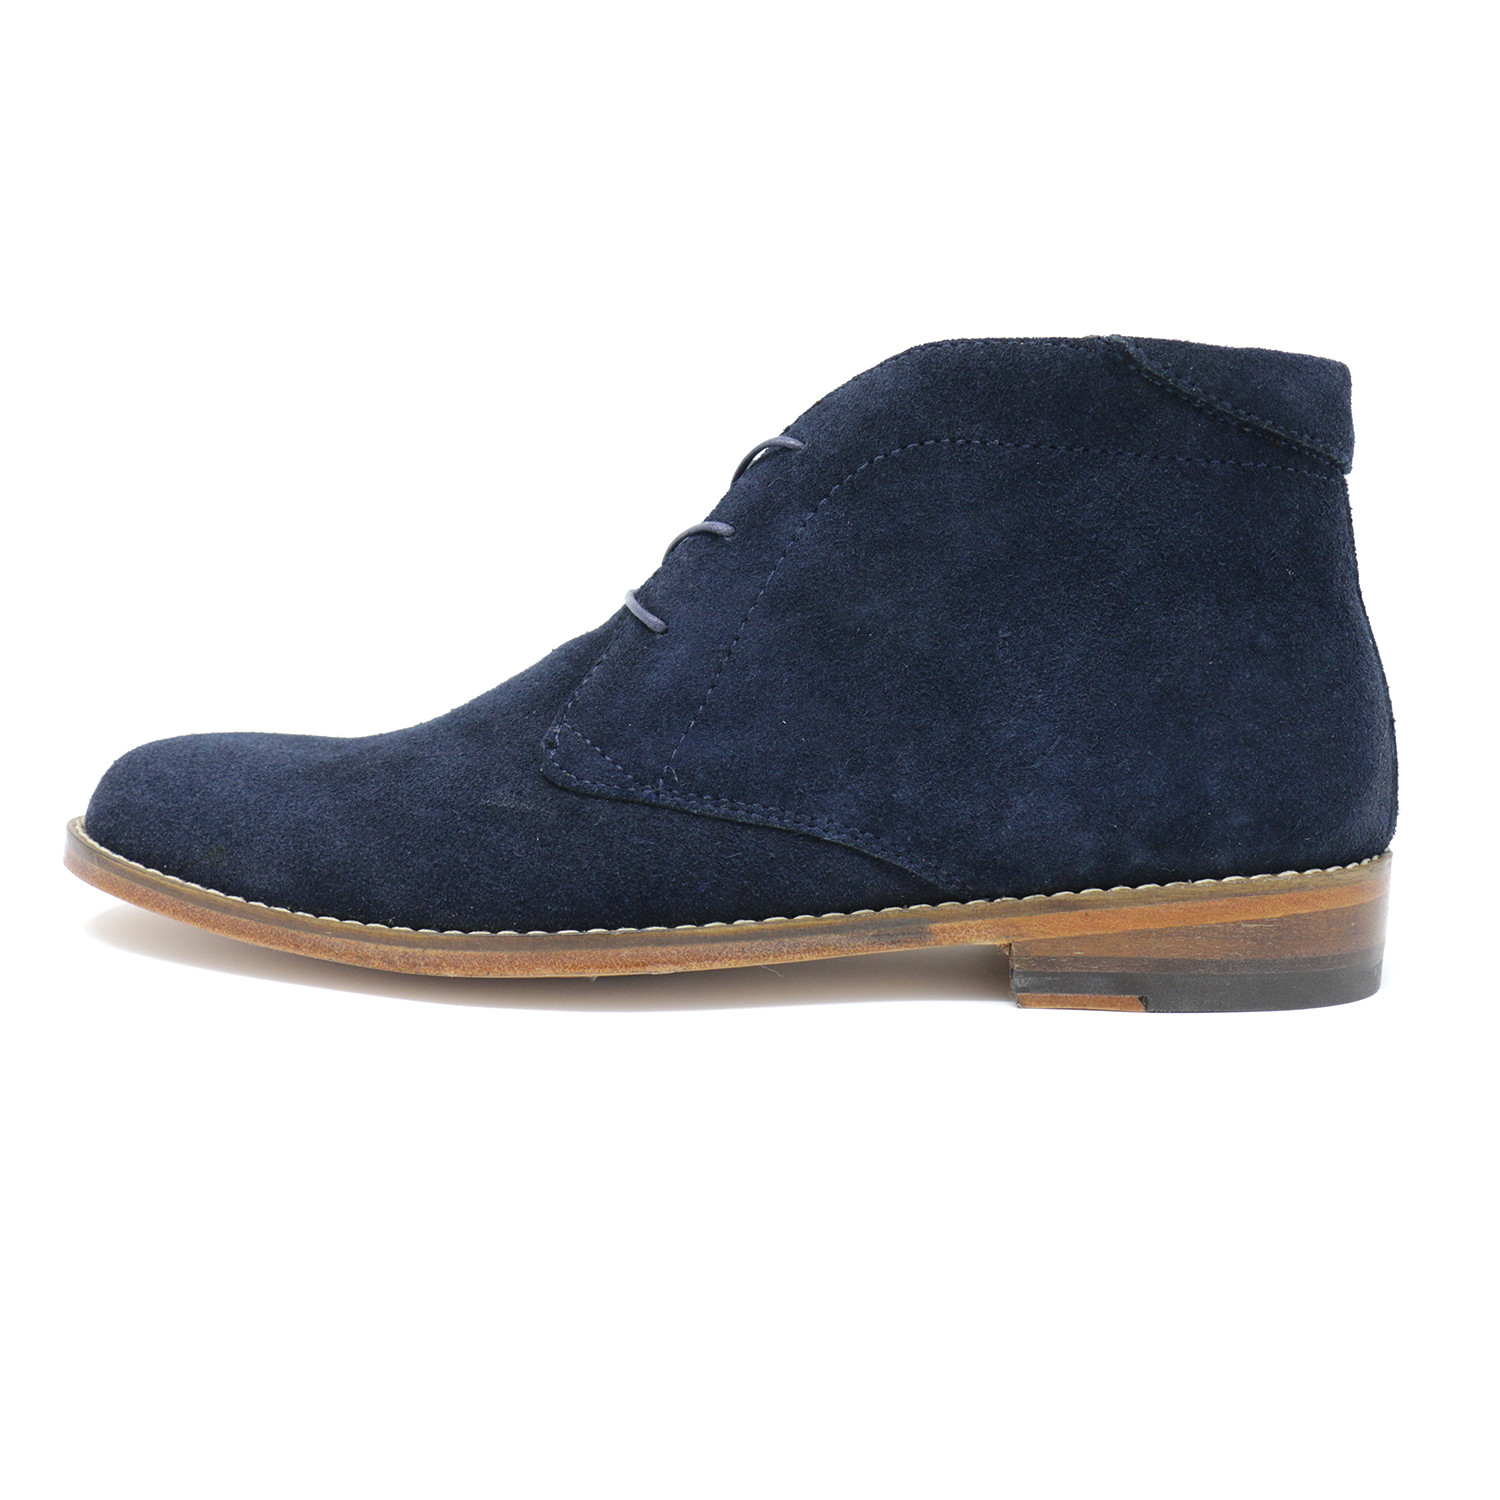 Naval Chukka Boots // Navy (US: 10.5) - Caballero - Touch of Modern